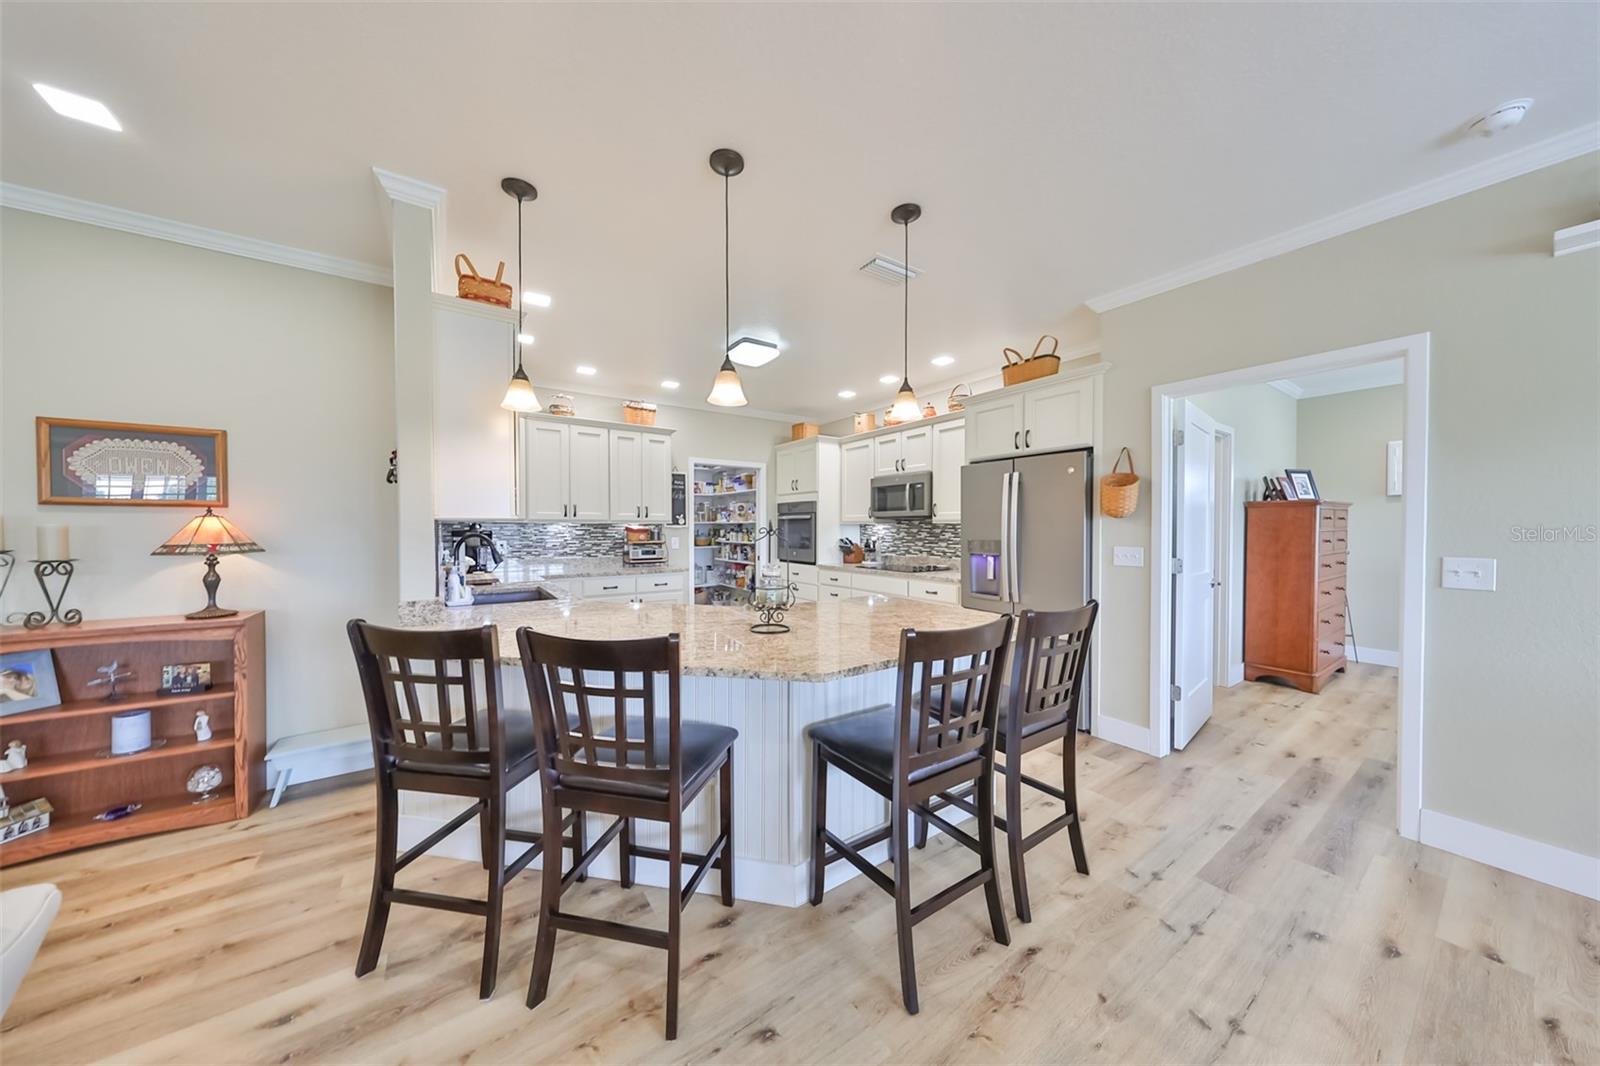 Kitchen has all the upgrades and features to cook comfortably, even with multiple cooks and entertain at the same time, with a large seated breakfast bar and recessed lighting, it's a perfect spot to catch up with friends and family.